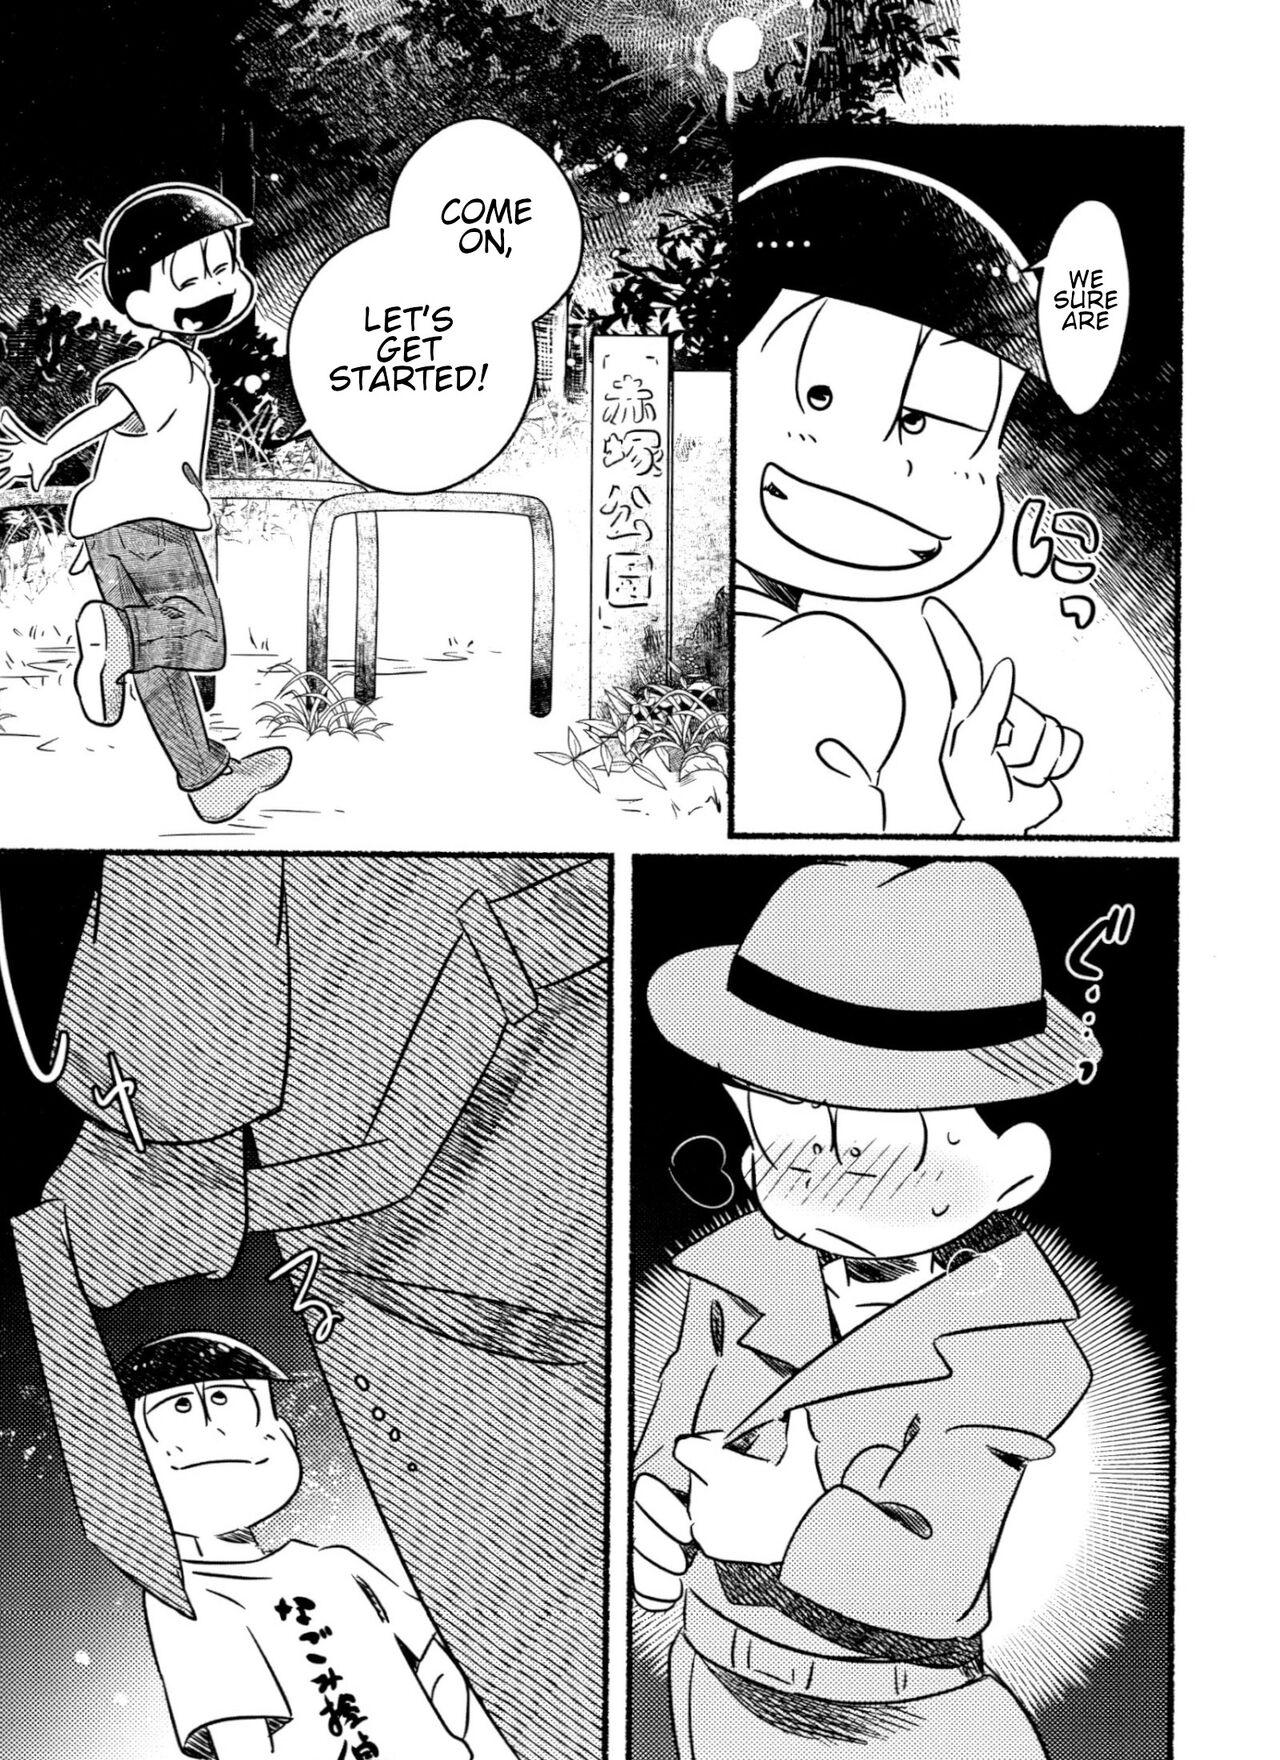 Adult Inspector Choromatsu walks naked at night and does XXX in the public eye R18 book - Osomatsu san Seduction Porn - Page 4